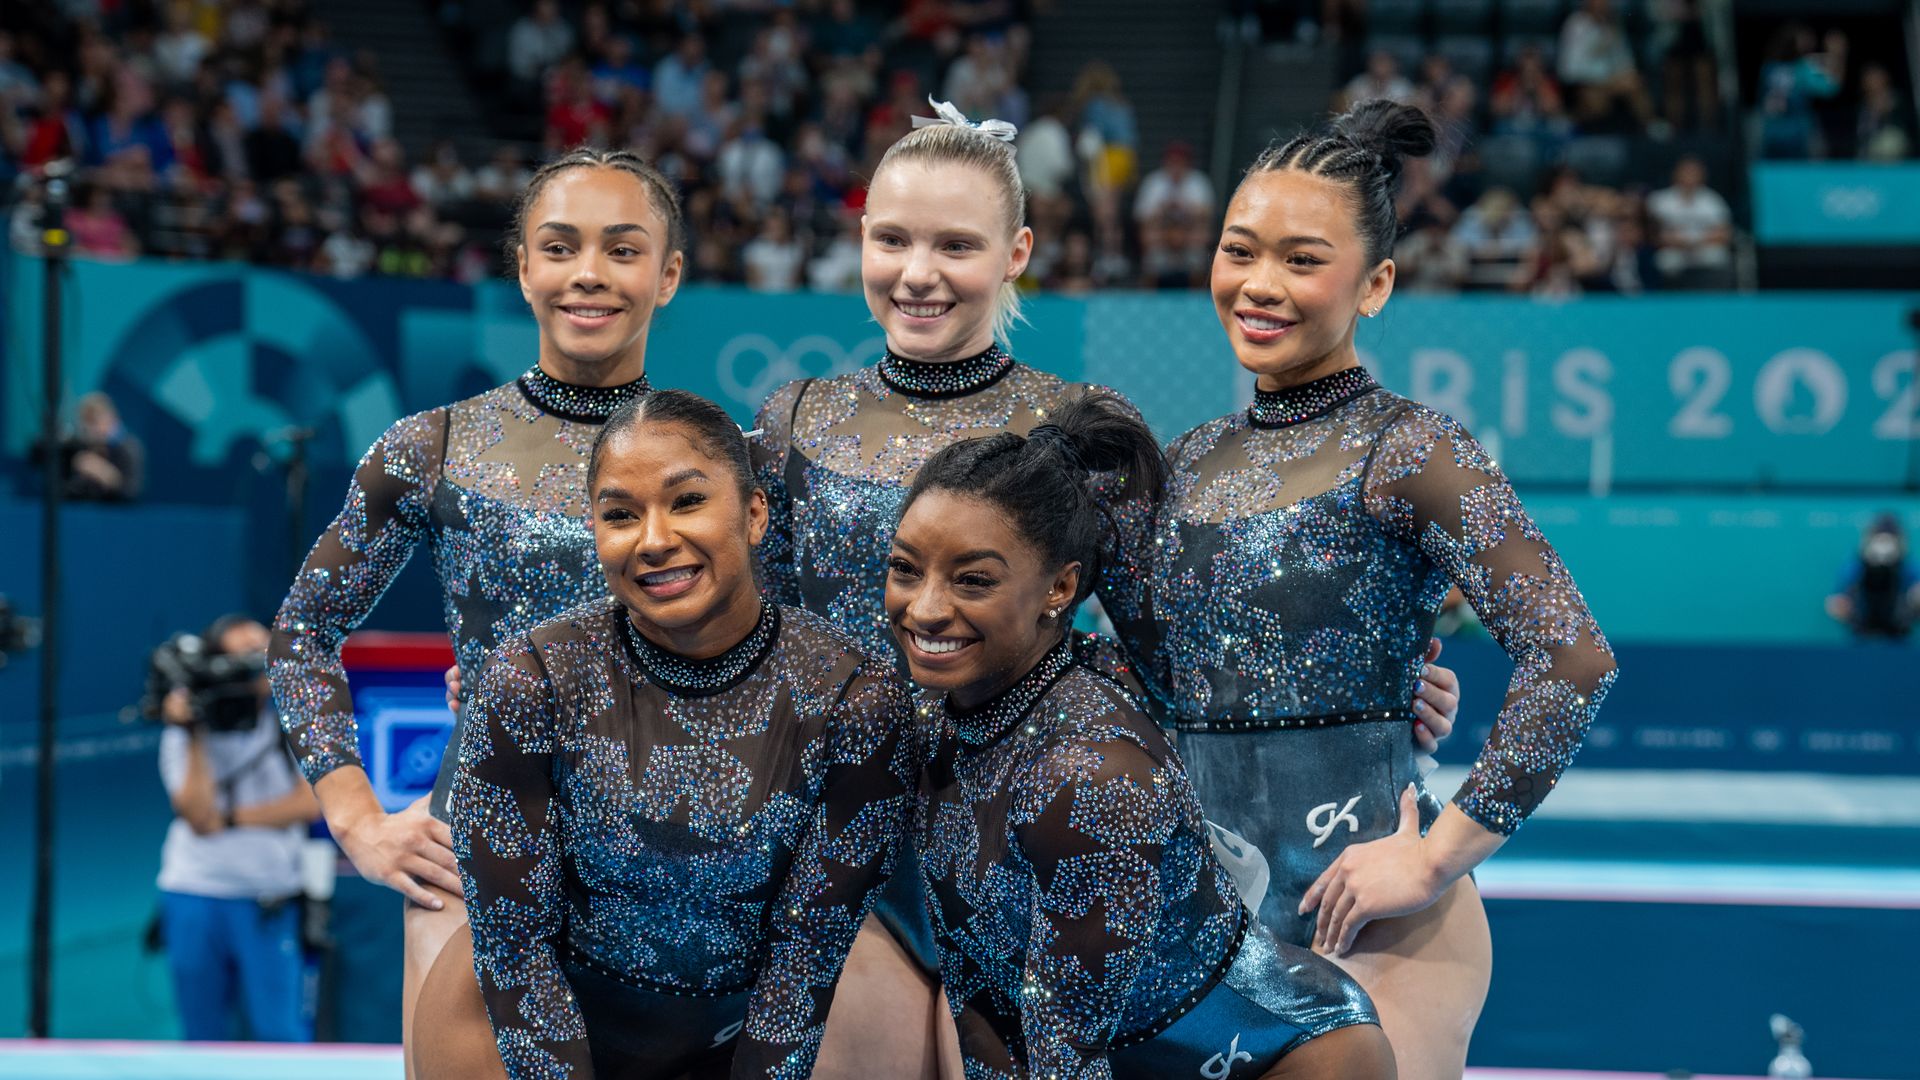 Team USA poses for a photo during the women's gymnastics at the Bercy Arena during the Paris 2024 Olympic Games in Paris, France, on July 28, 2024. (Photo by Aytac Unal/Anadolu via Getty Images)